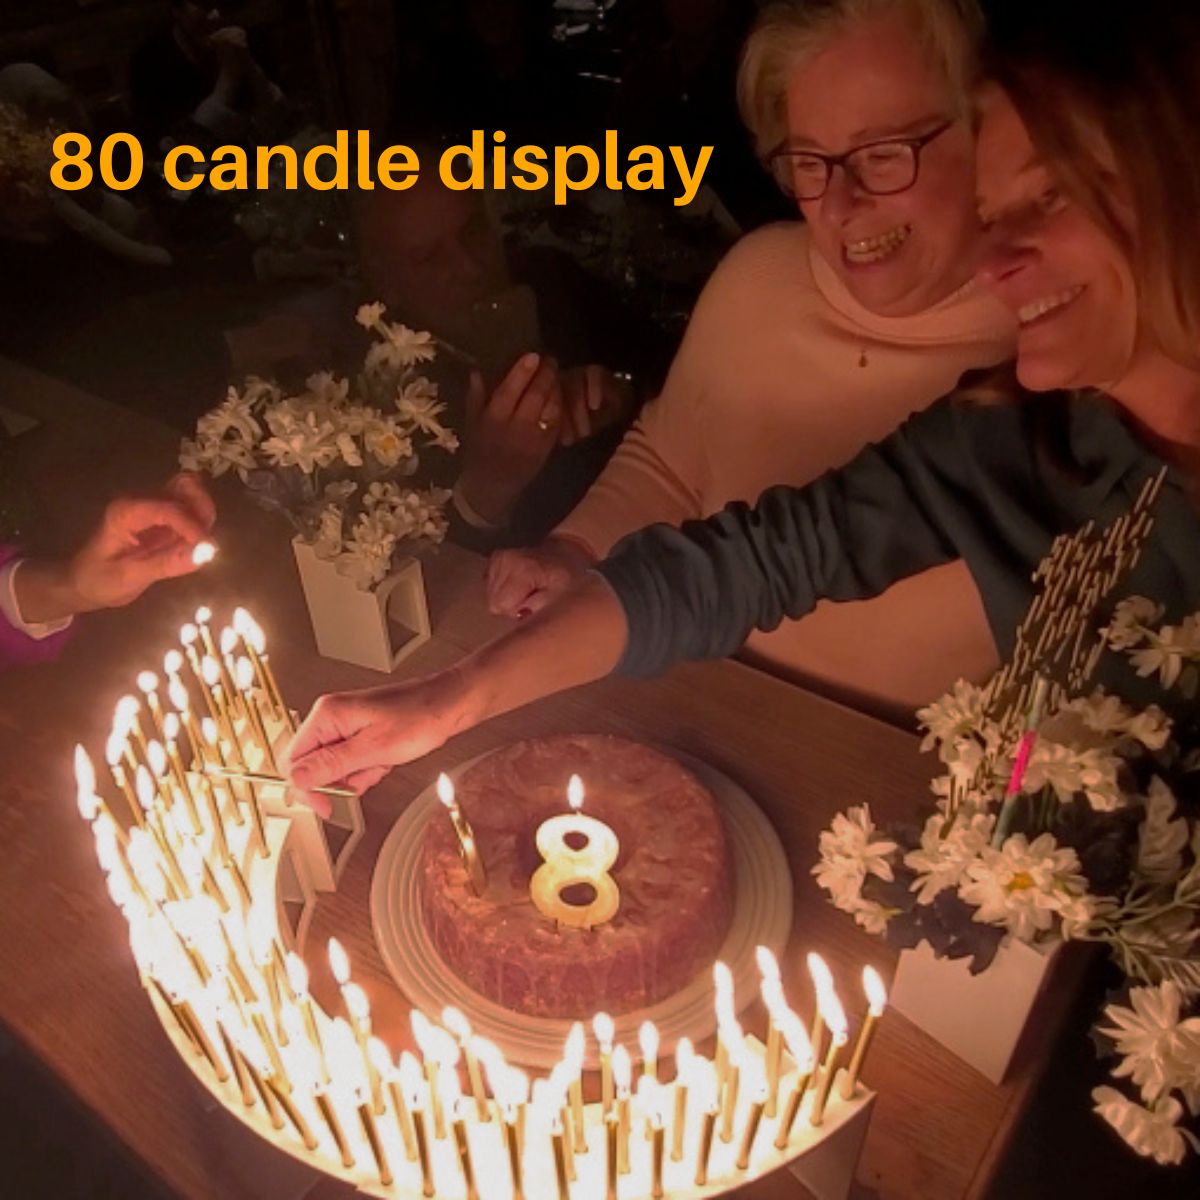 80 candle display on the Birthday Grandstand at an actual birthday party